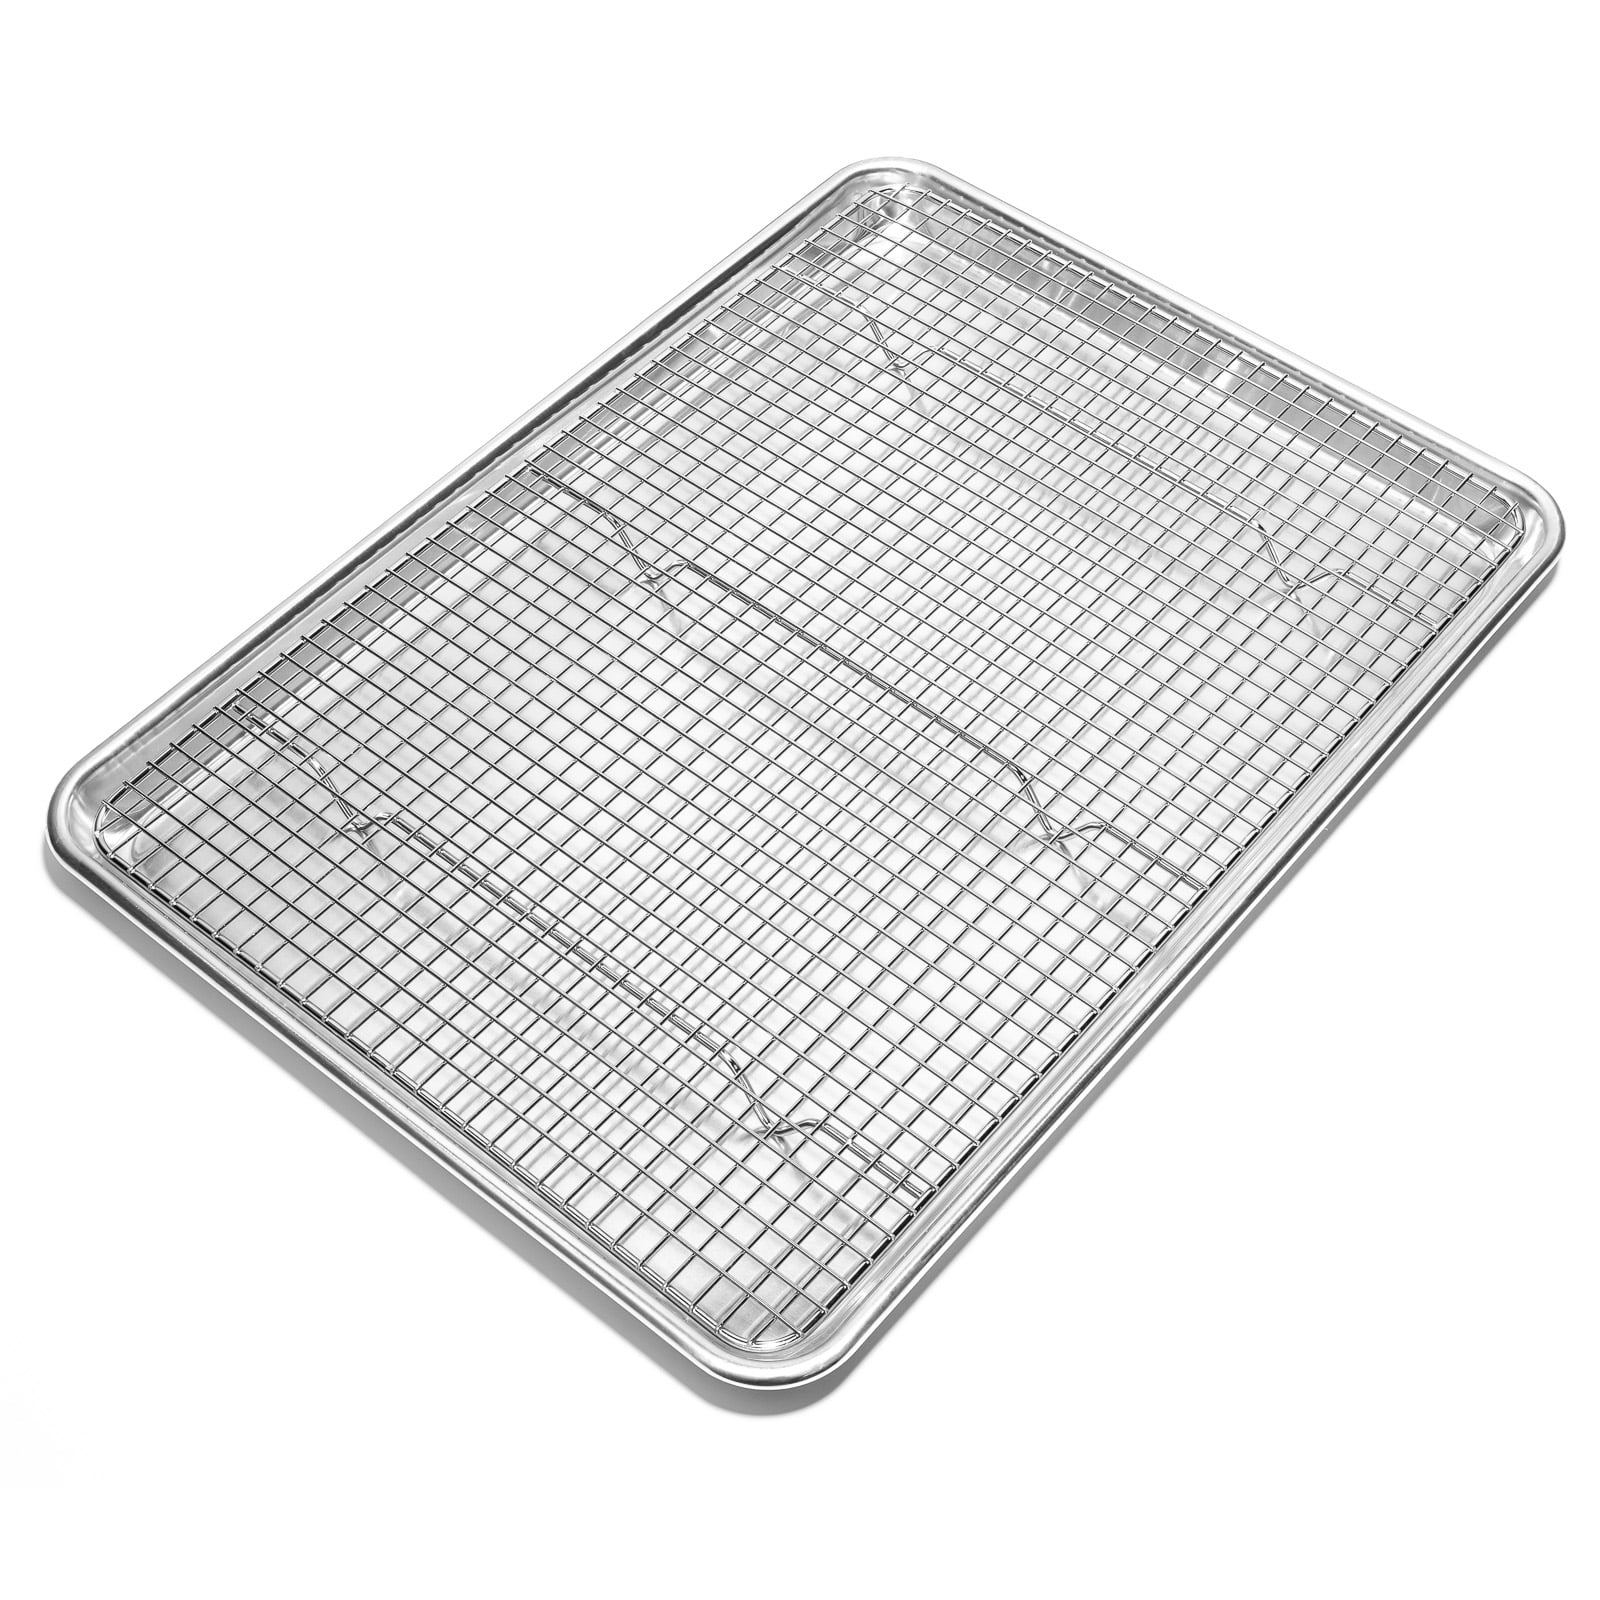 Cooling & Cooking Rack - 100% Stainless Steel rack, 12 x 17